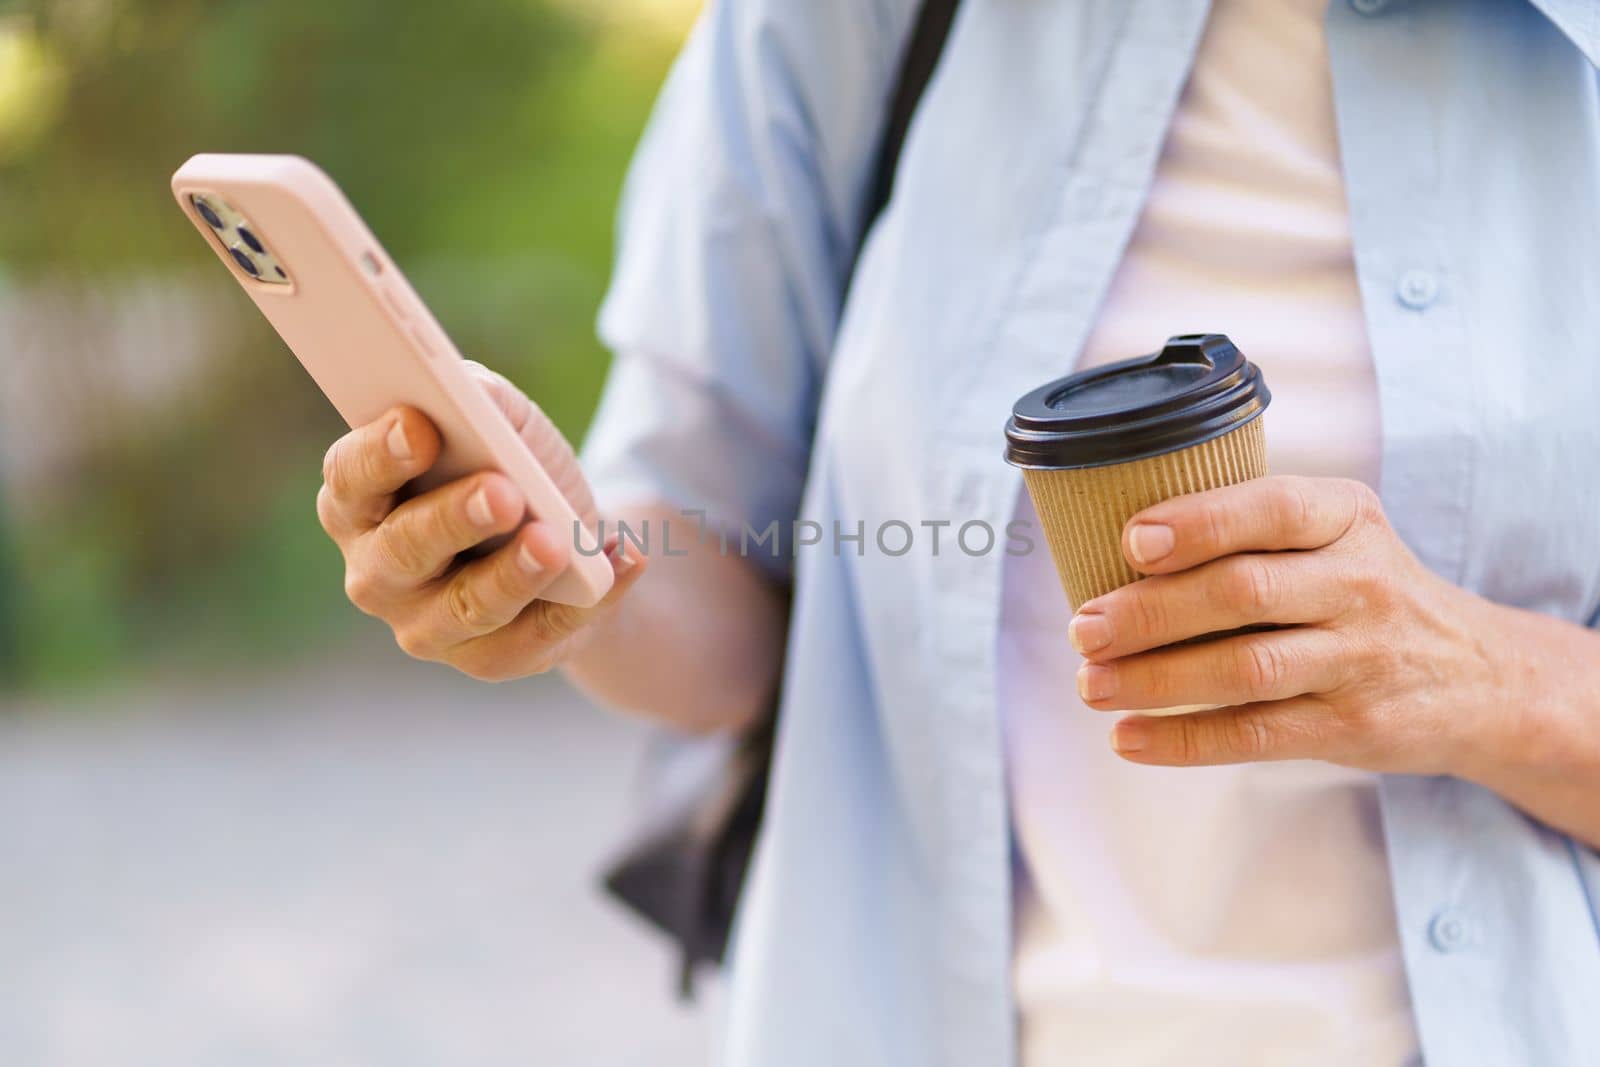 close-up photo focuses on a woman's hands holding a mobile phone and a coffee paper cup. The image depicts modern lifestyle and the widespread use of technology in daily routines. . High quality photo